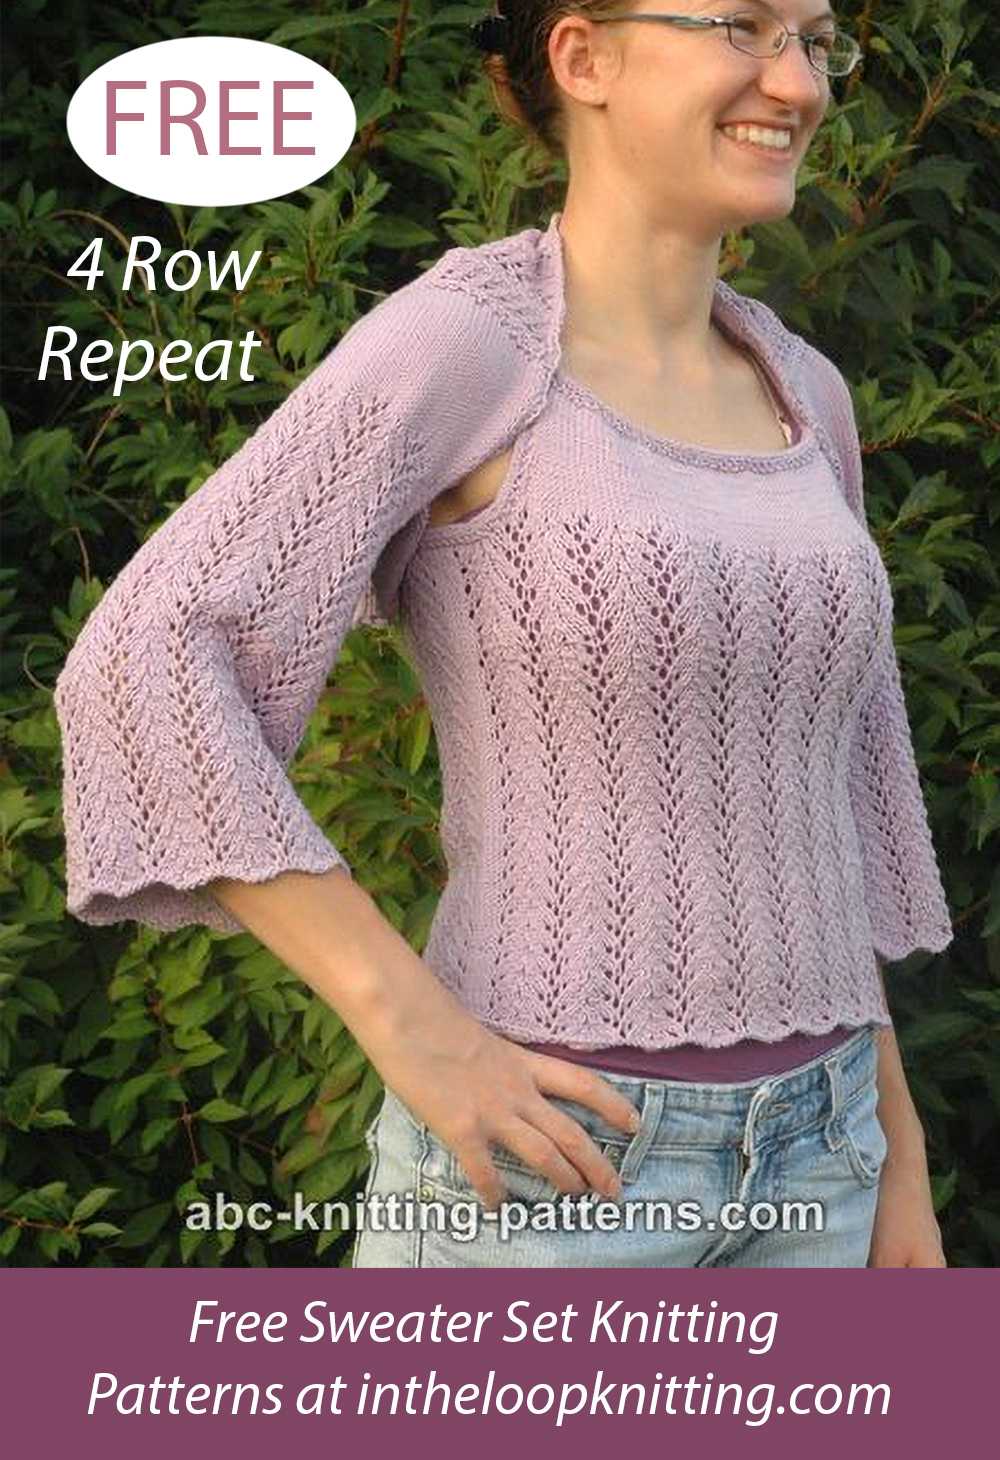 Free Vine Lace Shrug and Top Knitting Pattern